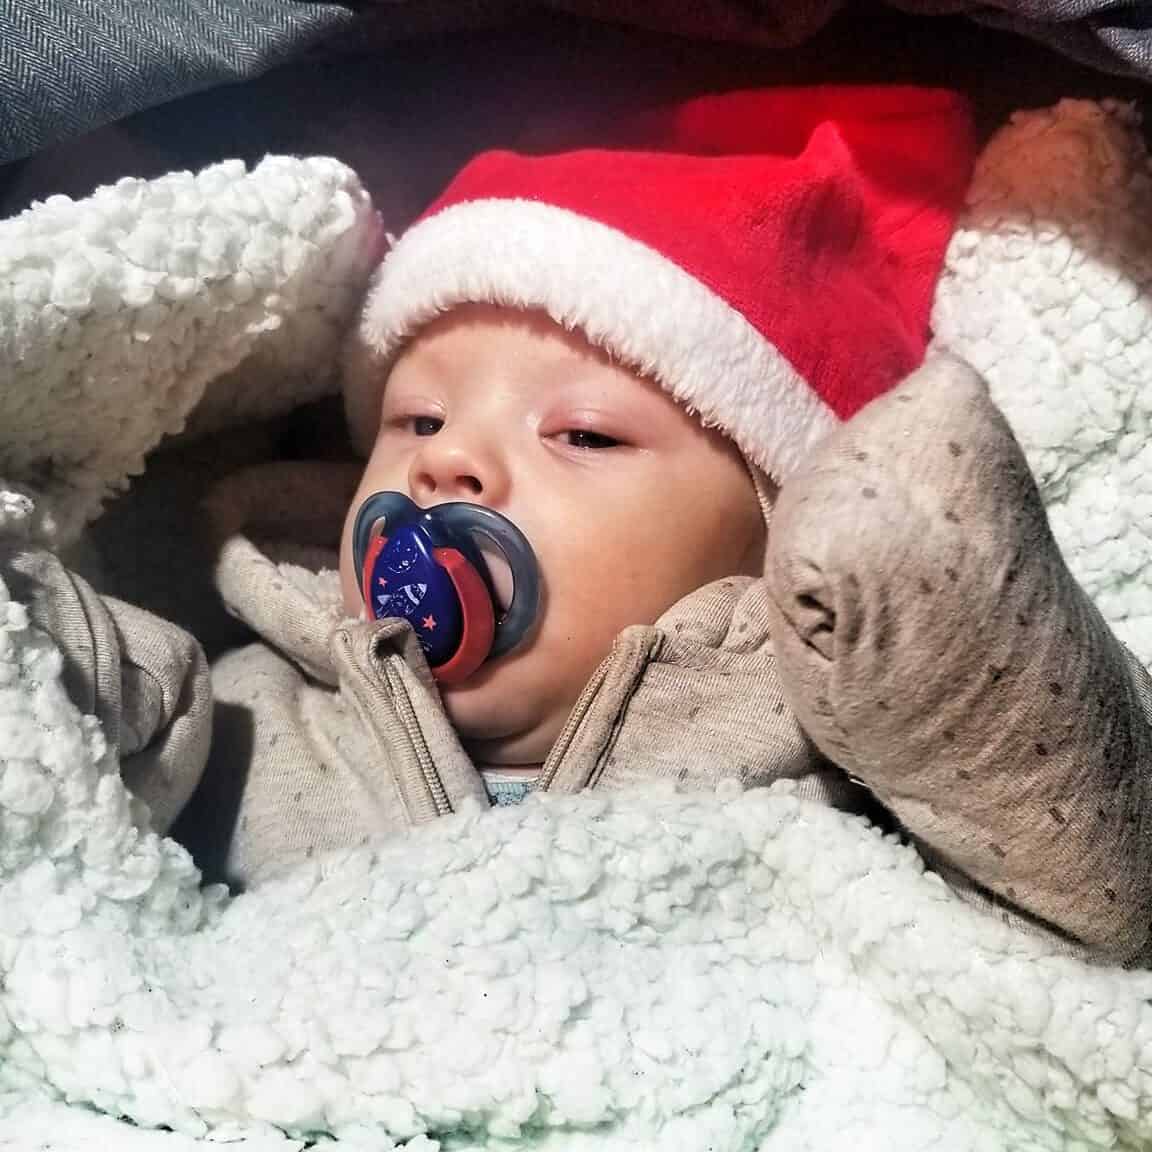 Baby in santa hat wrapped up at a Romanian Christmas gathering.